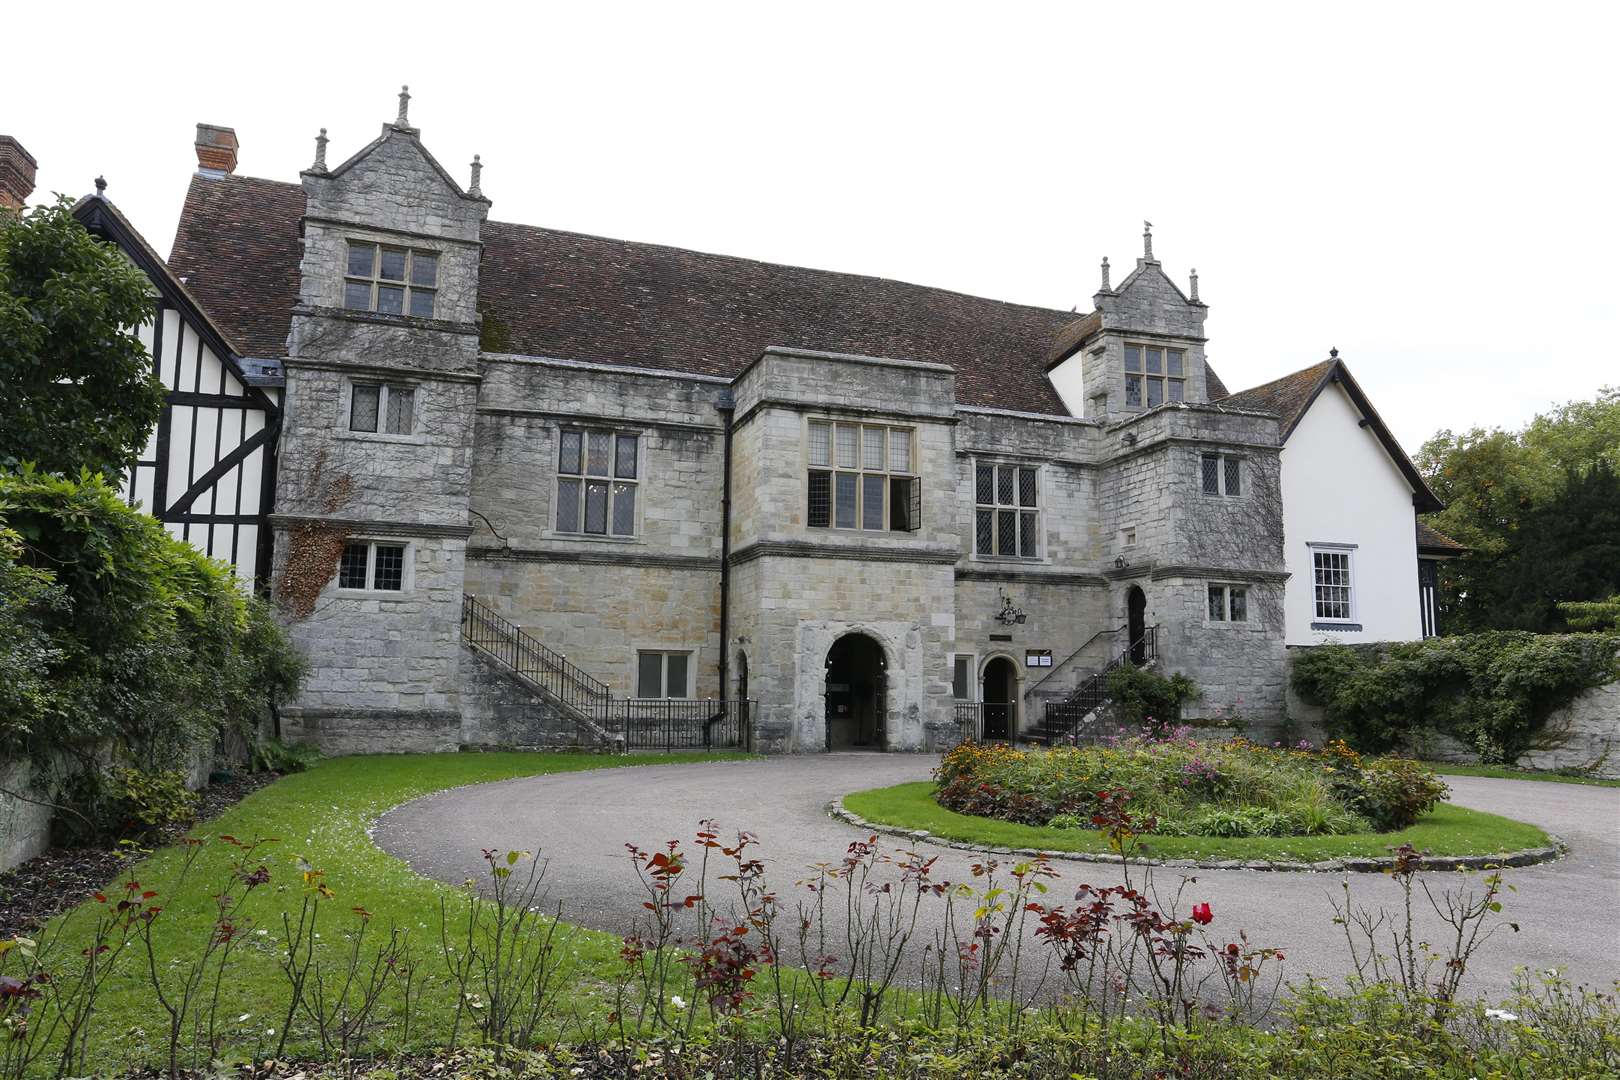 An inquest into Stephen Hilder's death was opened at Archbishop's Palace in Maidstone